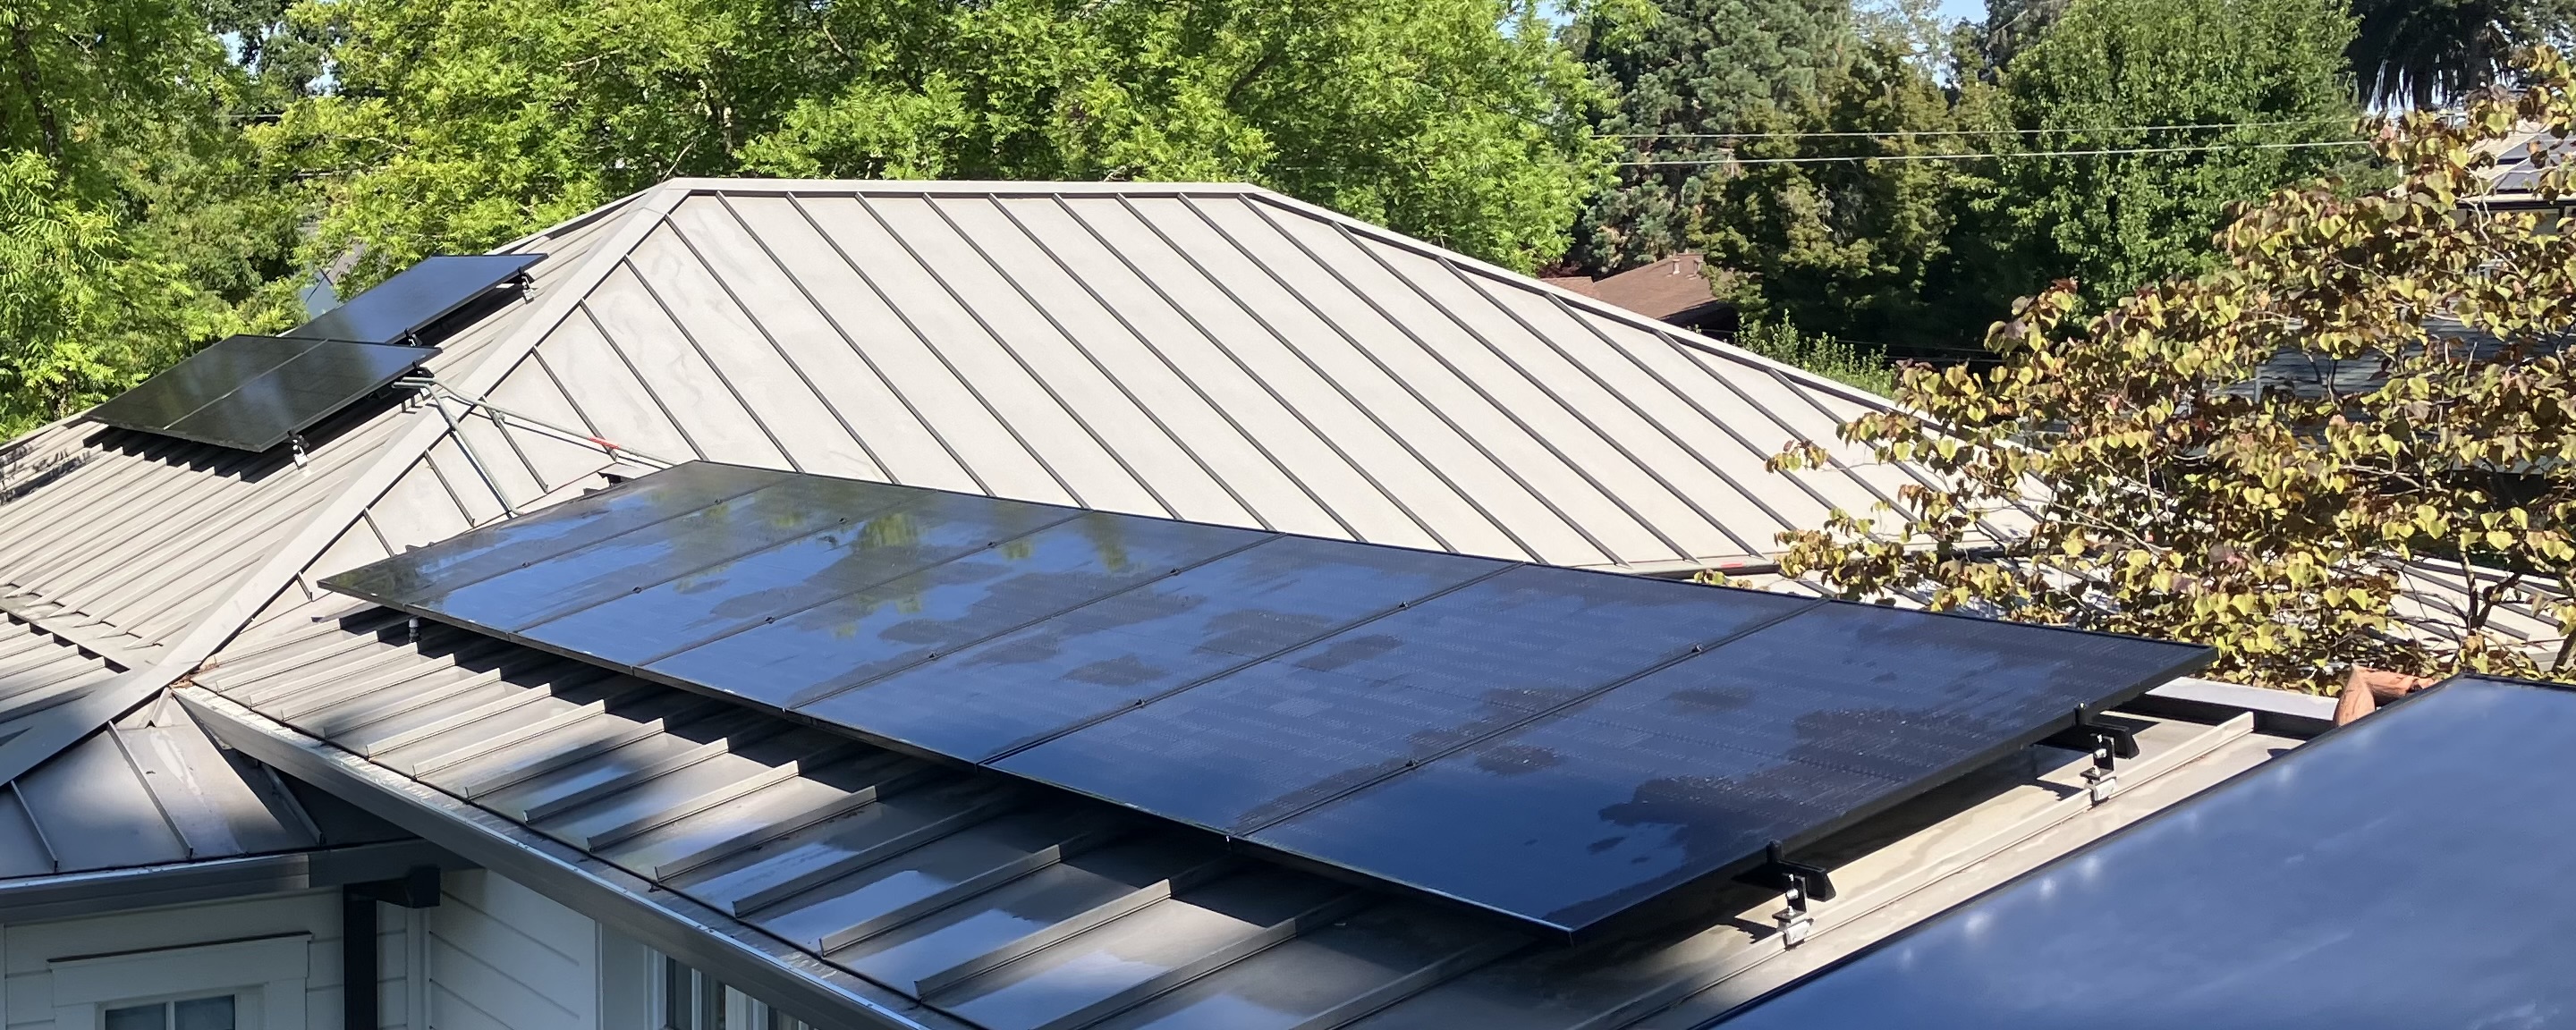 Top Quality Solar Panel Cleaning Performed in Sonoma, Ca. Thumbnail